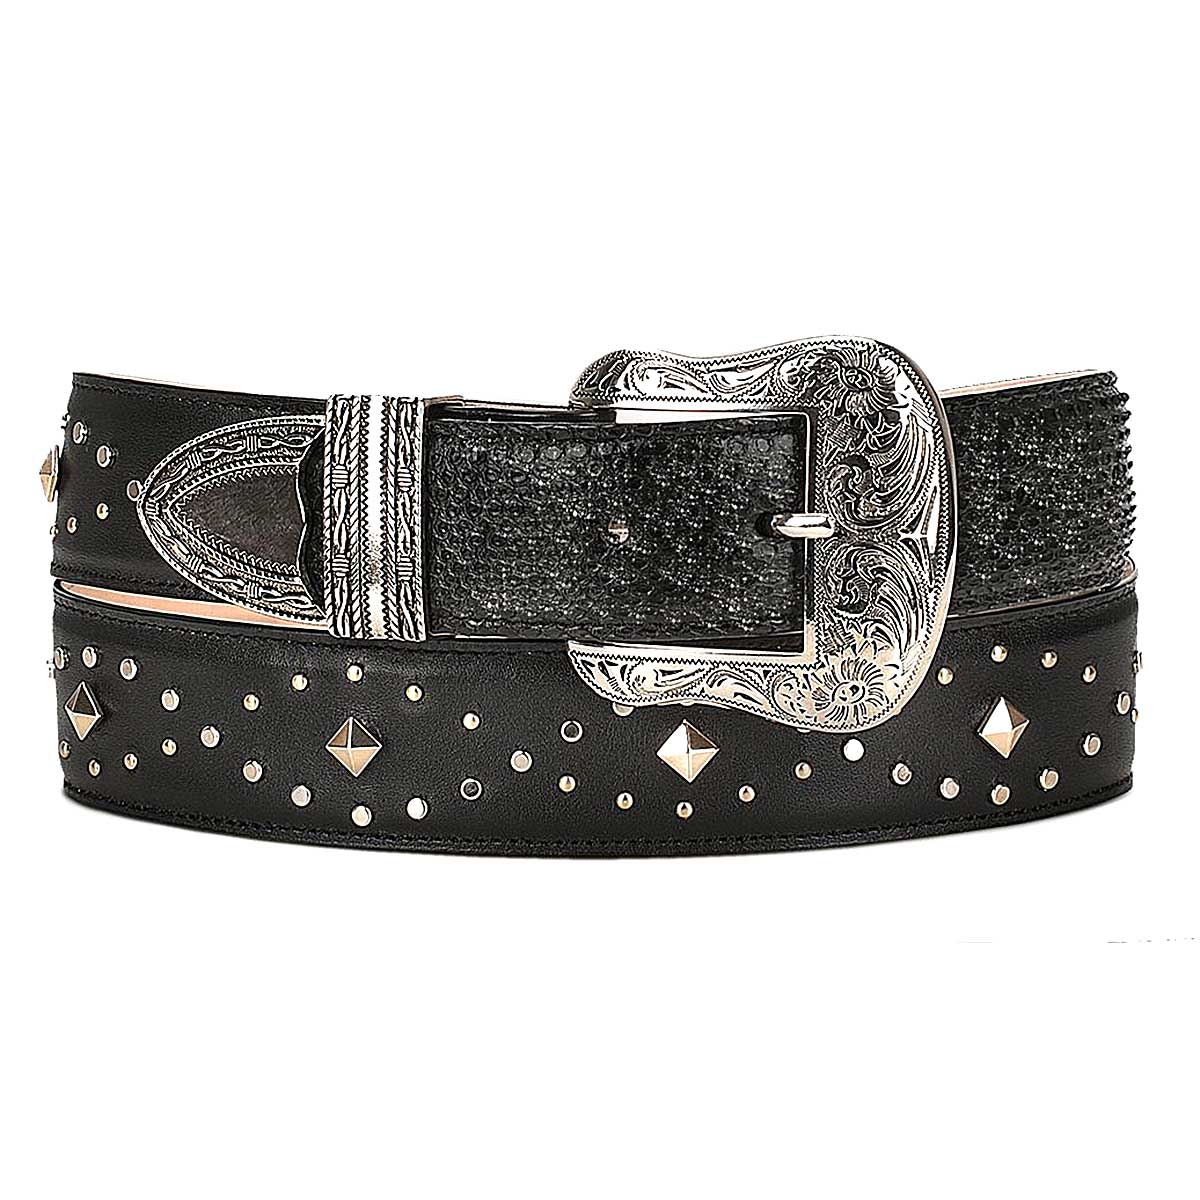 Cowboy belt in python leather and bovine leather.